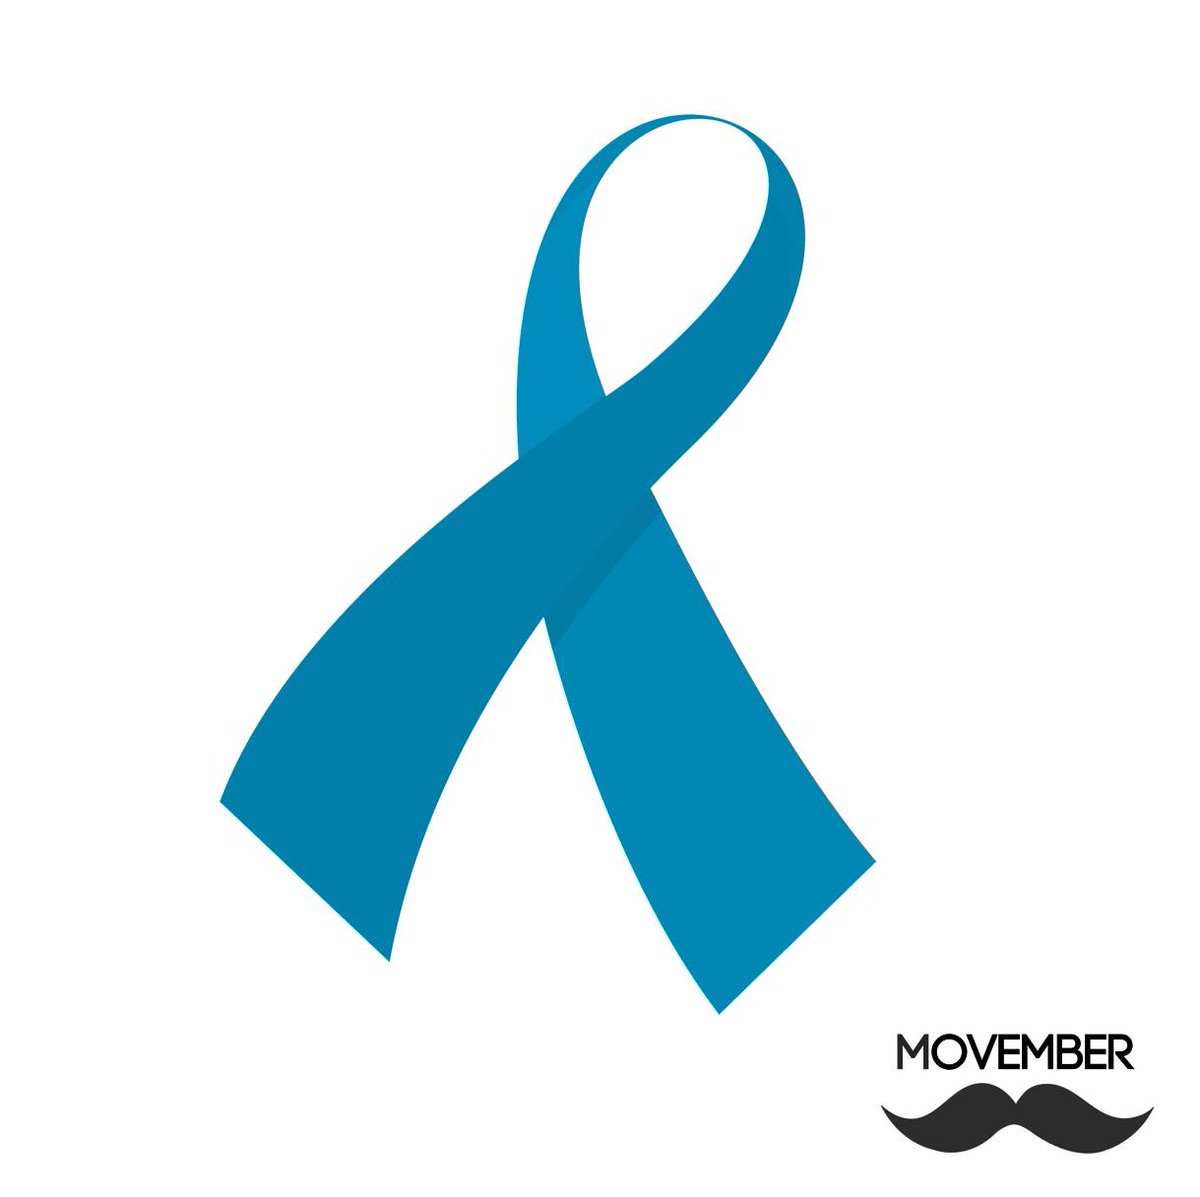 Bayer Ag On Twitter November Is Movember Retweet The Blue Ribbon To Raise Awareness About Prostate Cancer What Is Prostate Cancer Https T Co Ikhhqkfcze Https T Co M6dollpo94